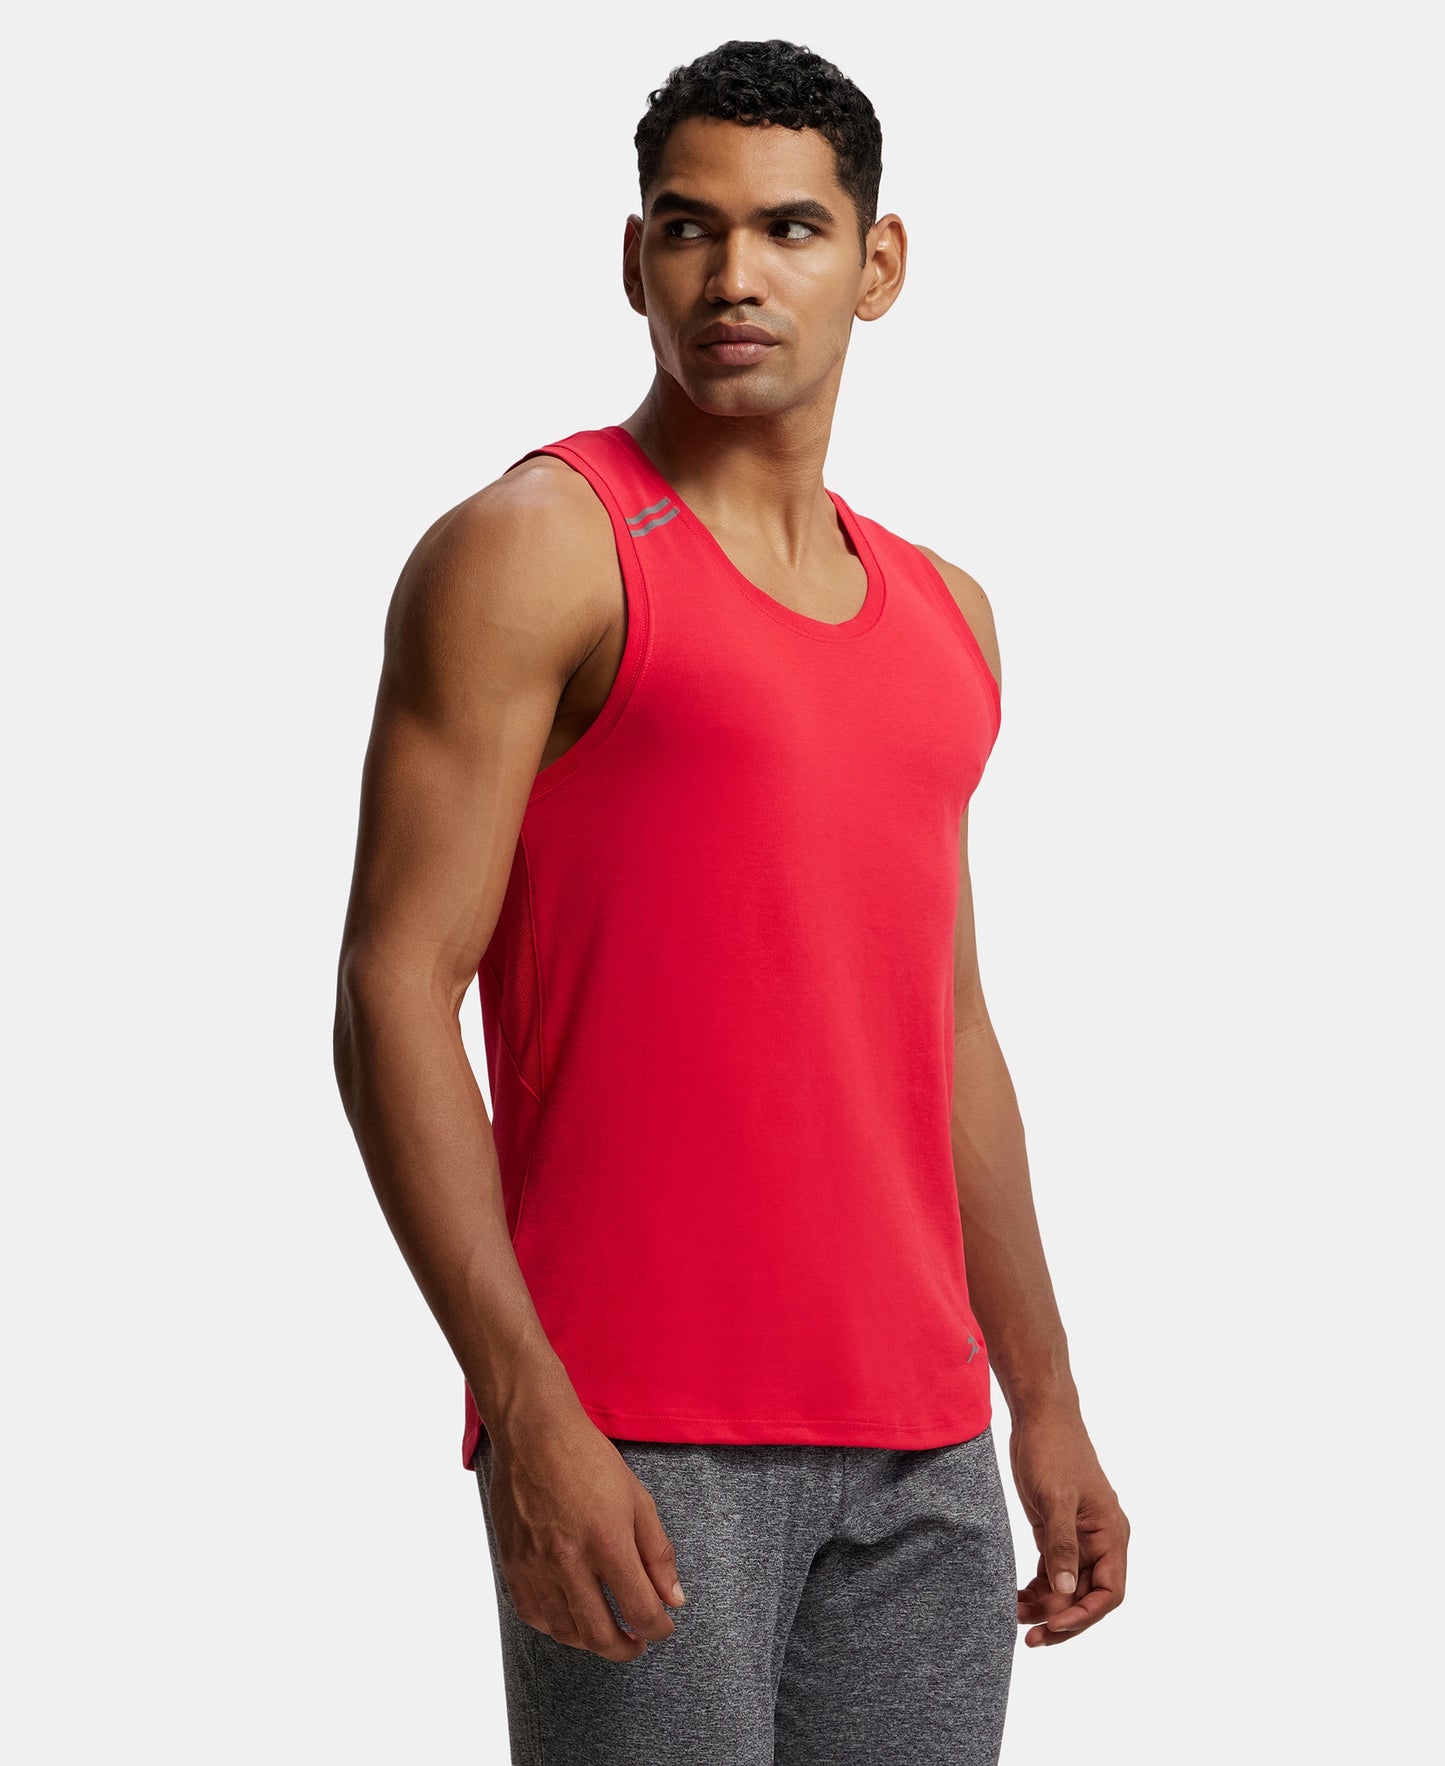 Super Combed Cotton Blend Solid Performance Tank Top with Breathable Mesh - Team Red-2